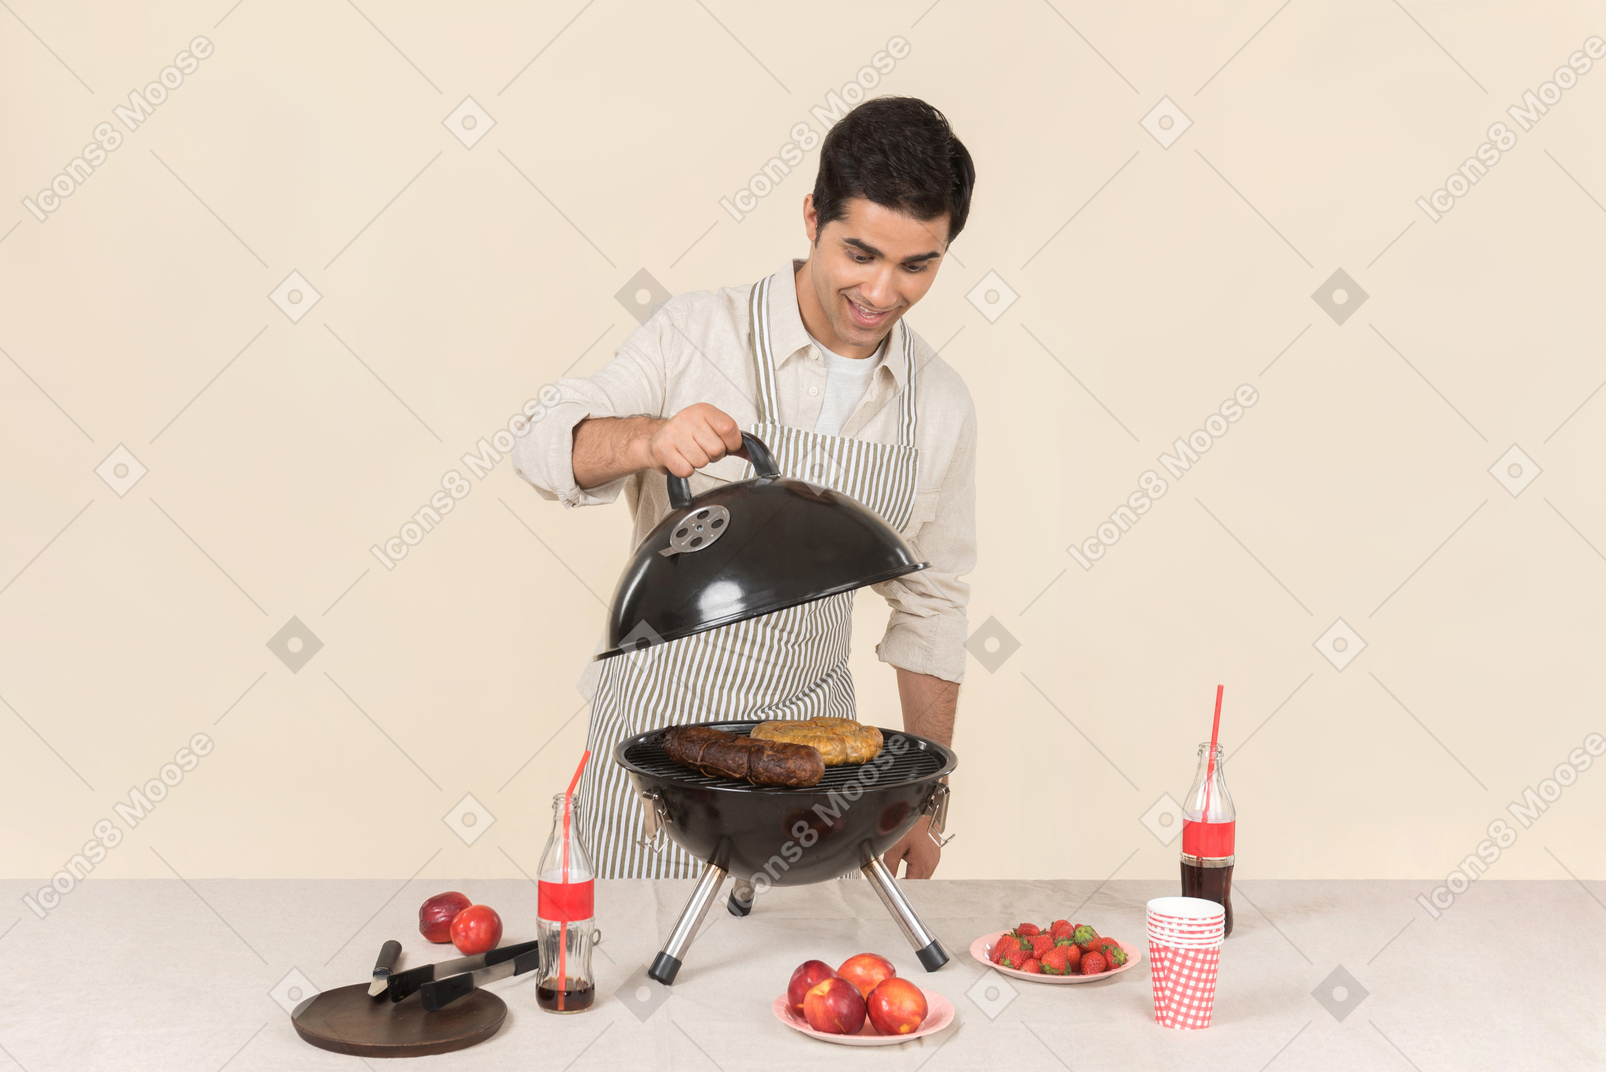 Young caucasian man opening a grill